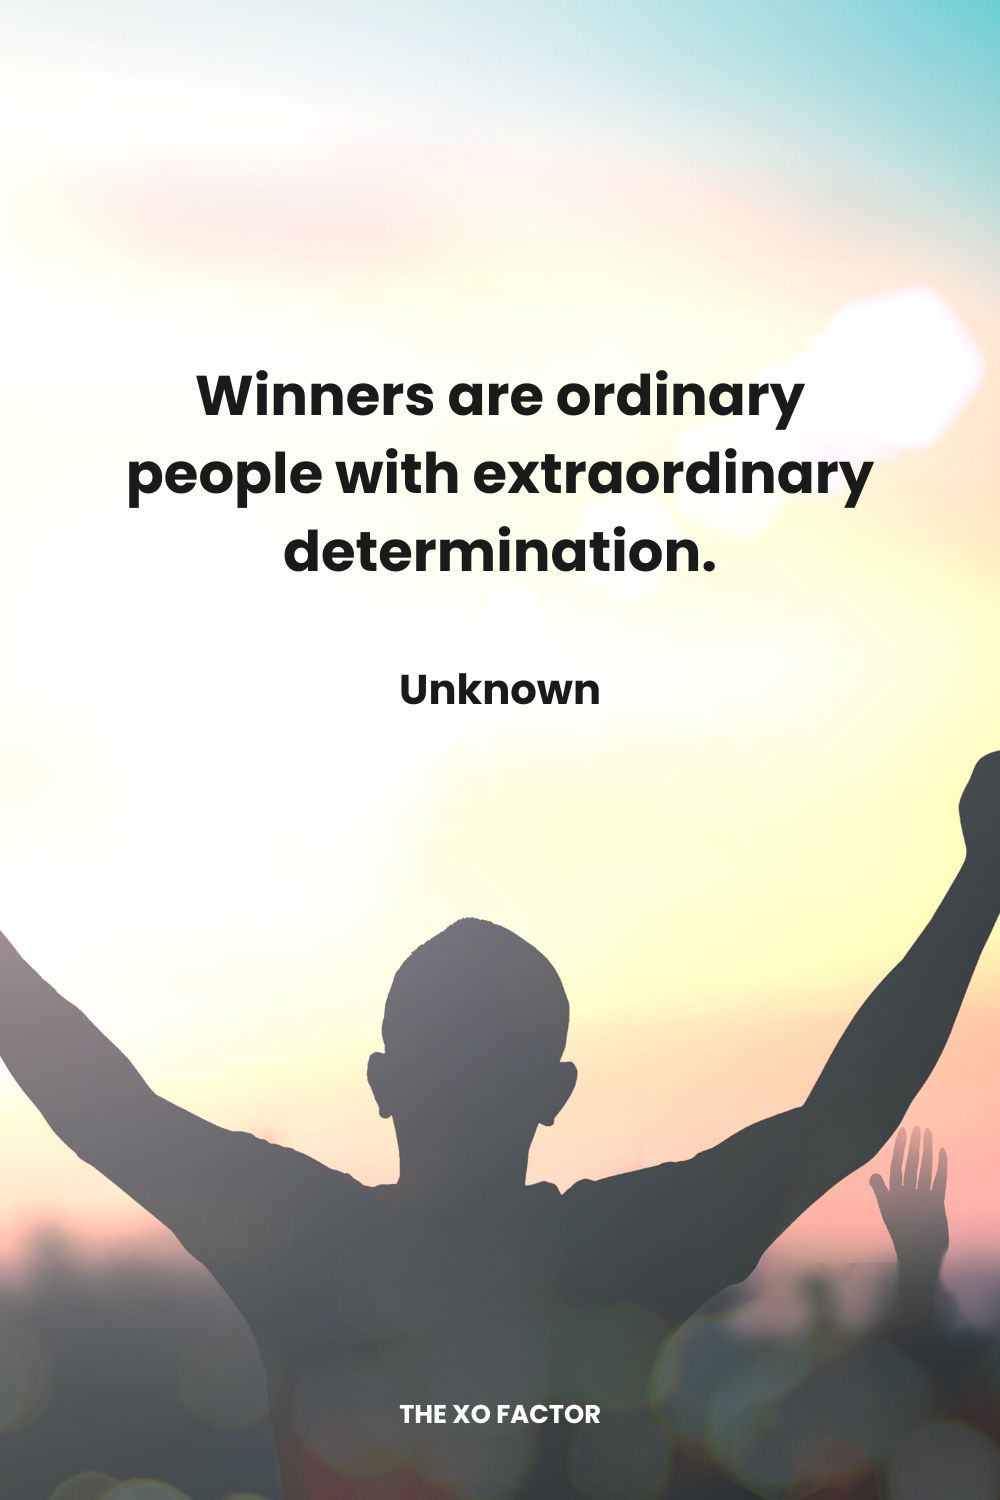 Winners are ordinary people with extraordinary determination. Unknown